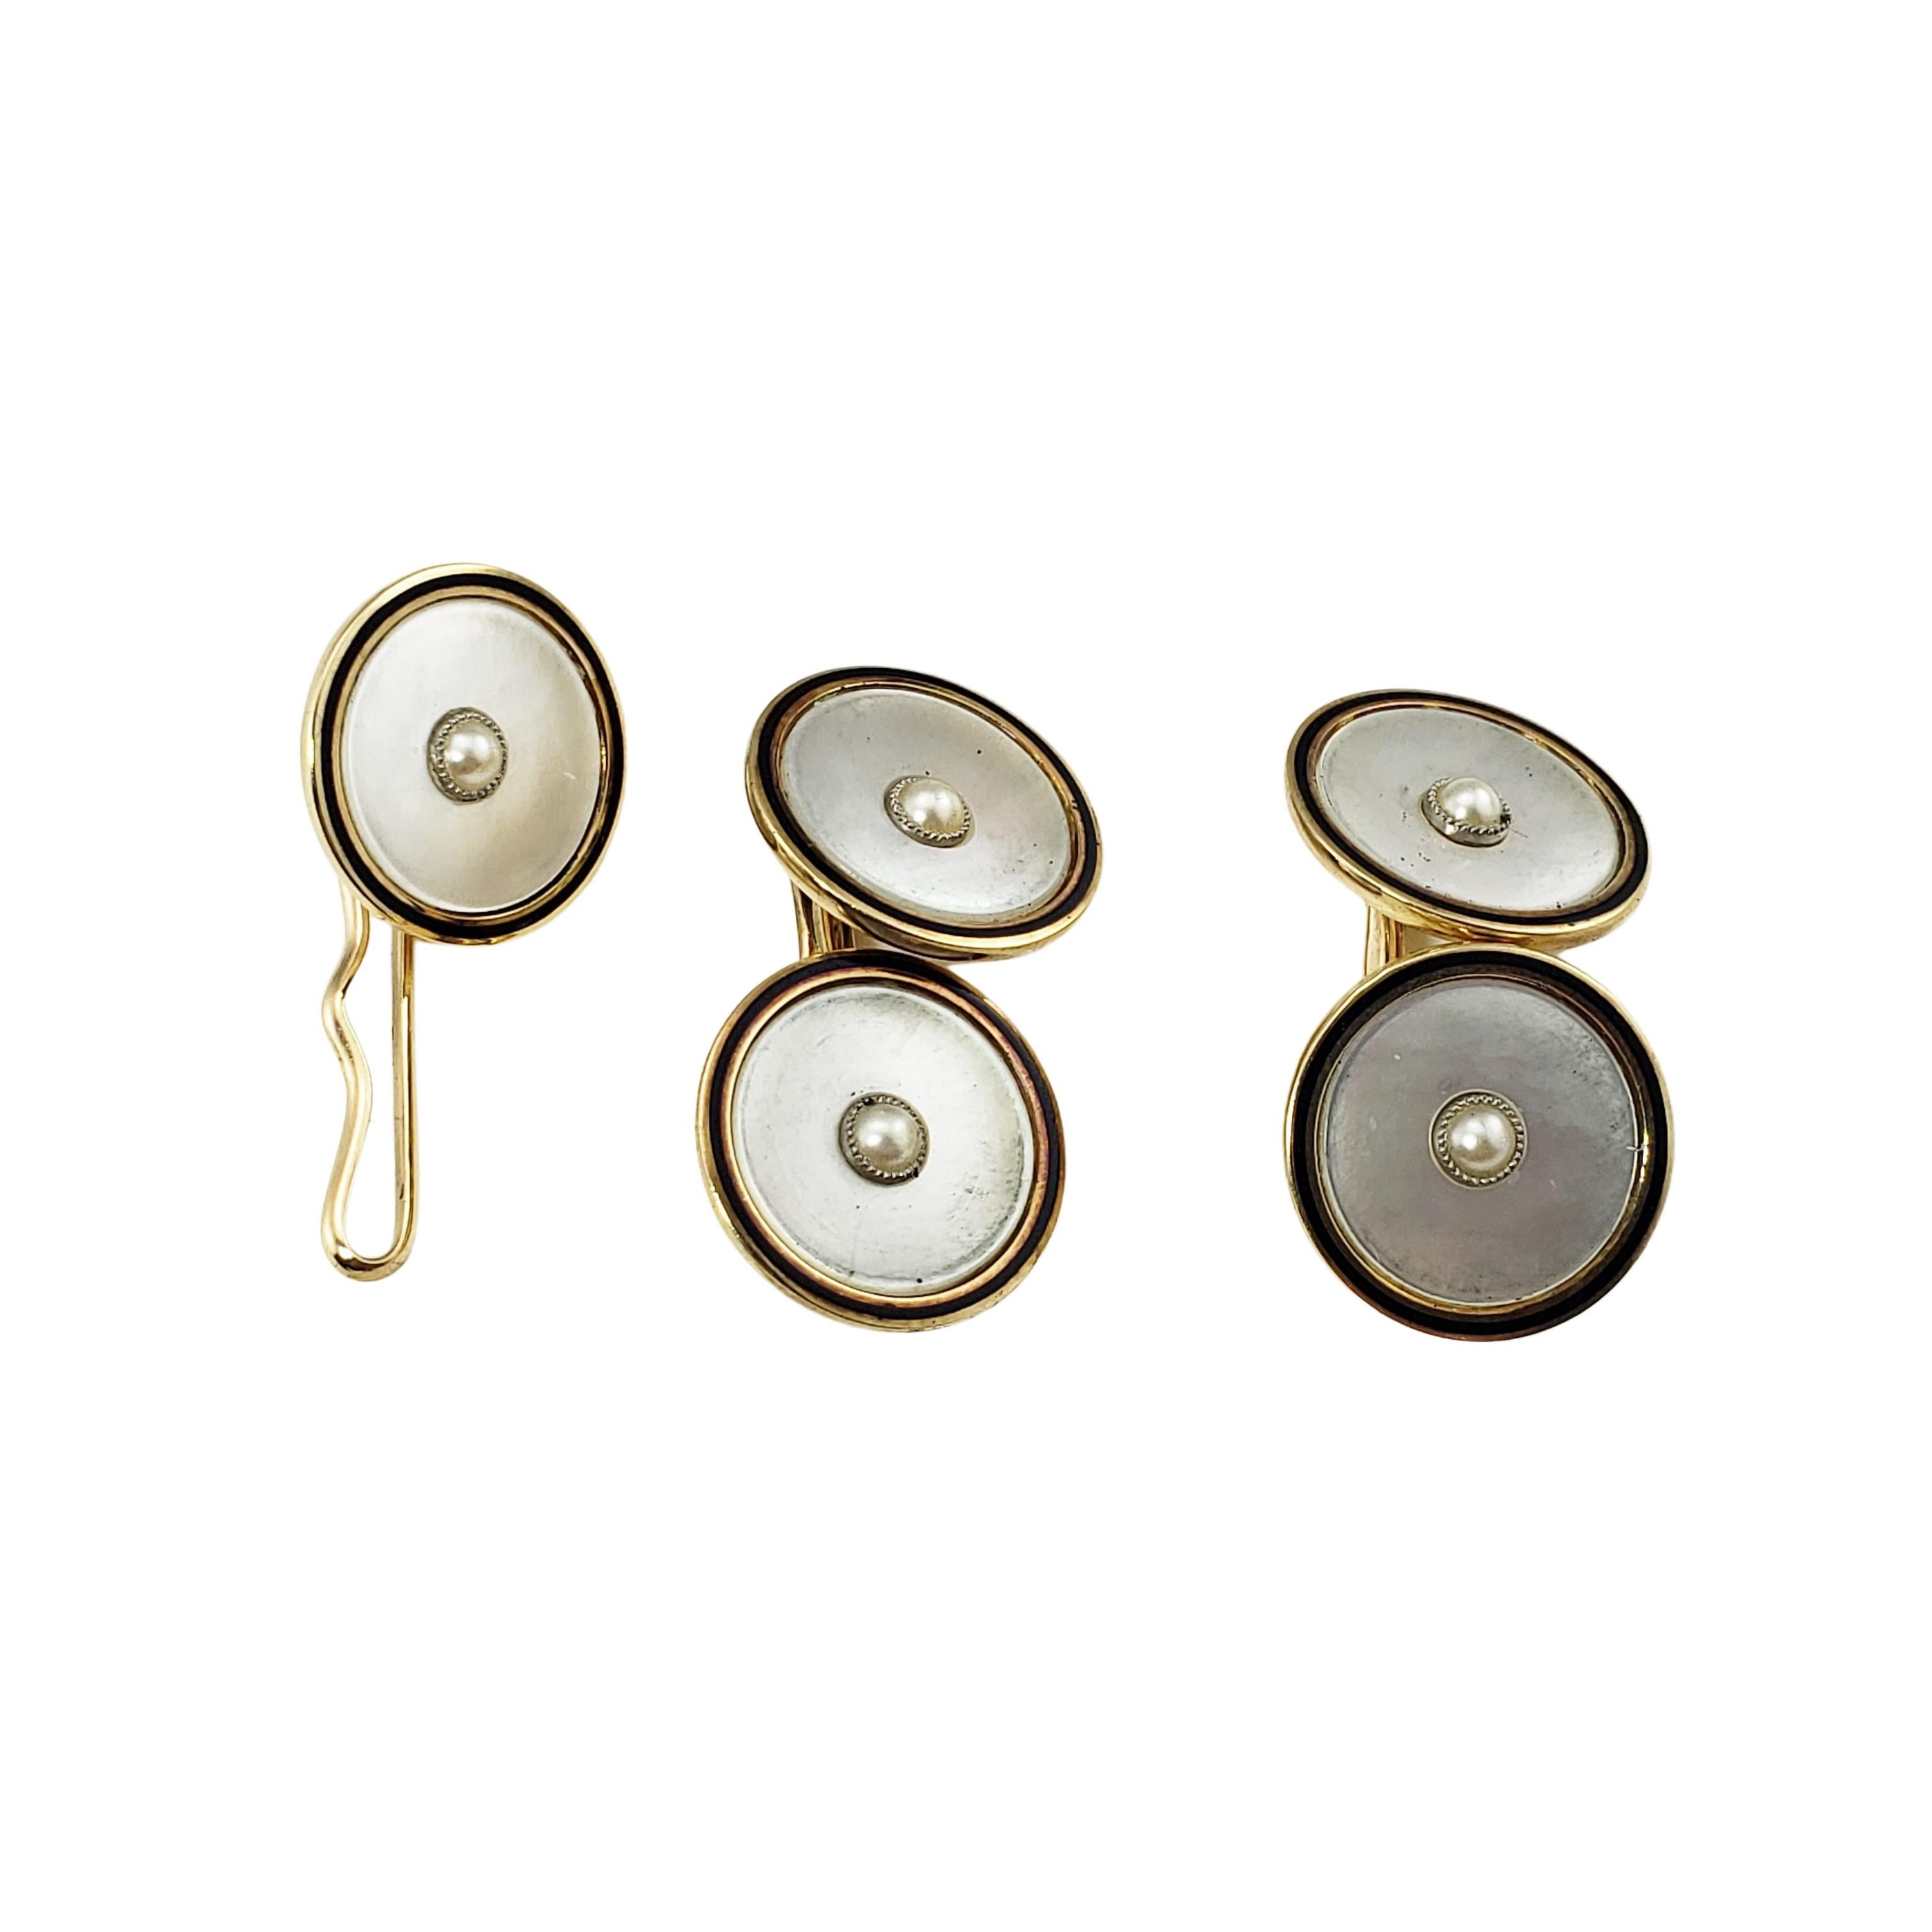 Vintage 14 Karat Yellow Gold Mother of Pearl and Seed Pearl Cufflinks and Button-

These elegant cufflinks and button are crafted in beautifully detailed 14K yellow gold and mother of pearl and are each accented with one seed pearl.

Size: 14